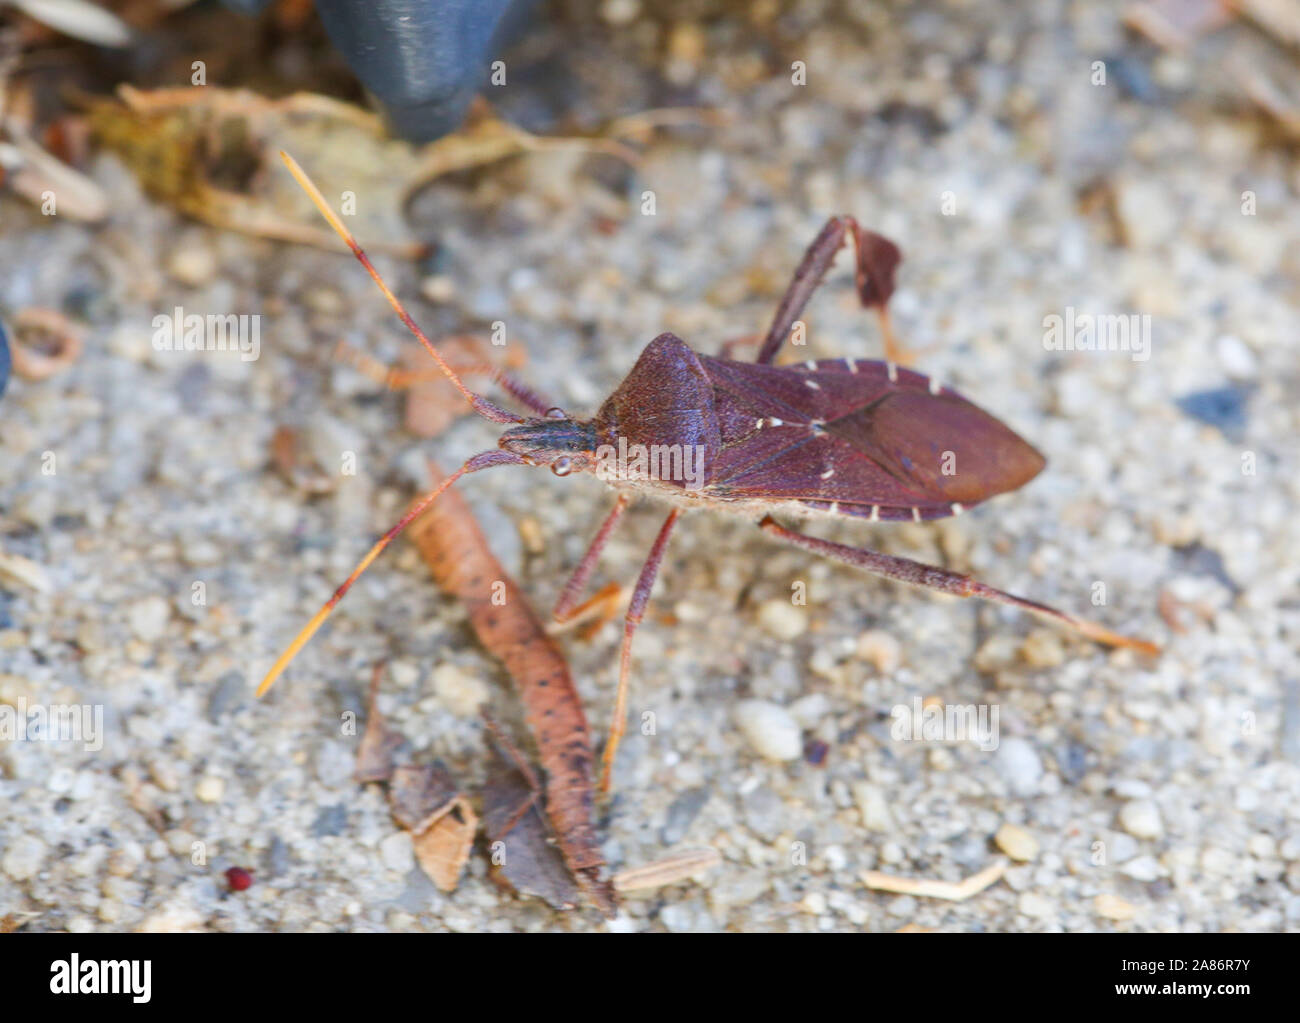 Western Conifer Seed Bug (Leptoglossus occidentalis) in backyard - Image Stock Photo